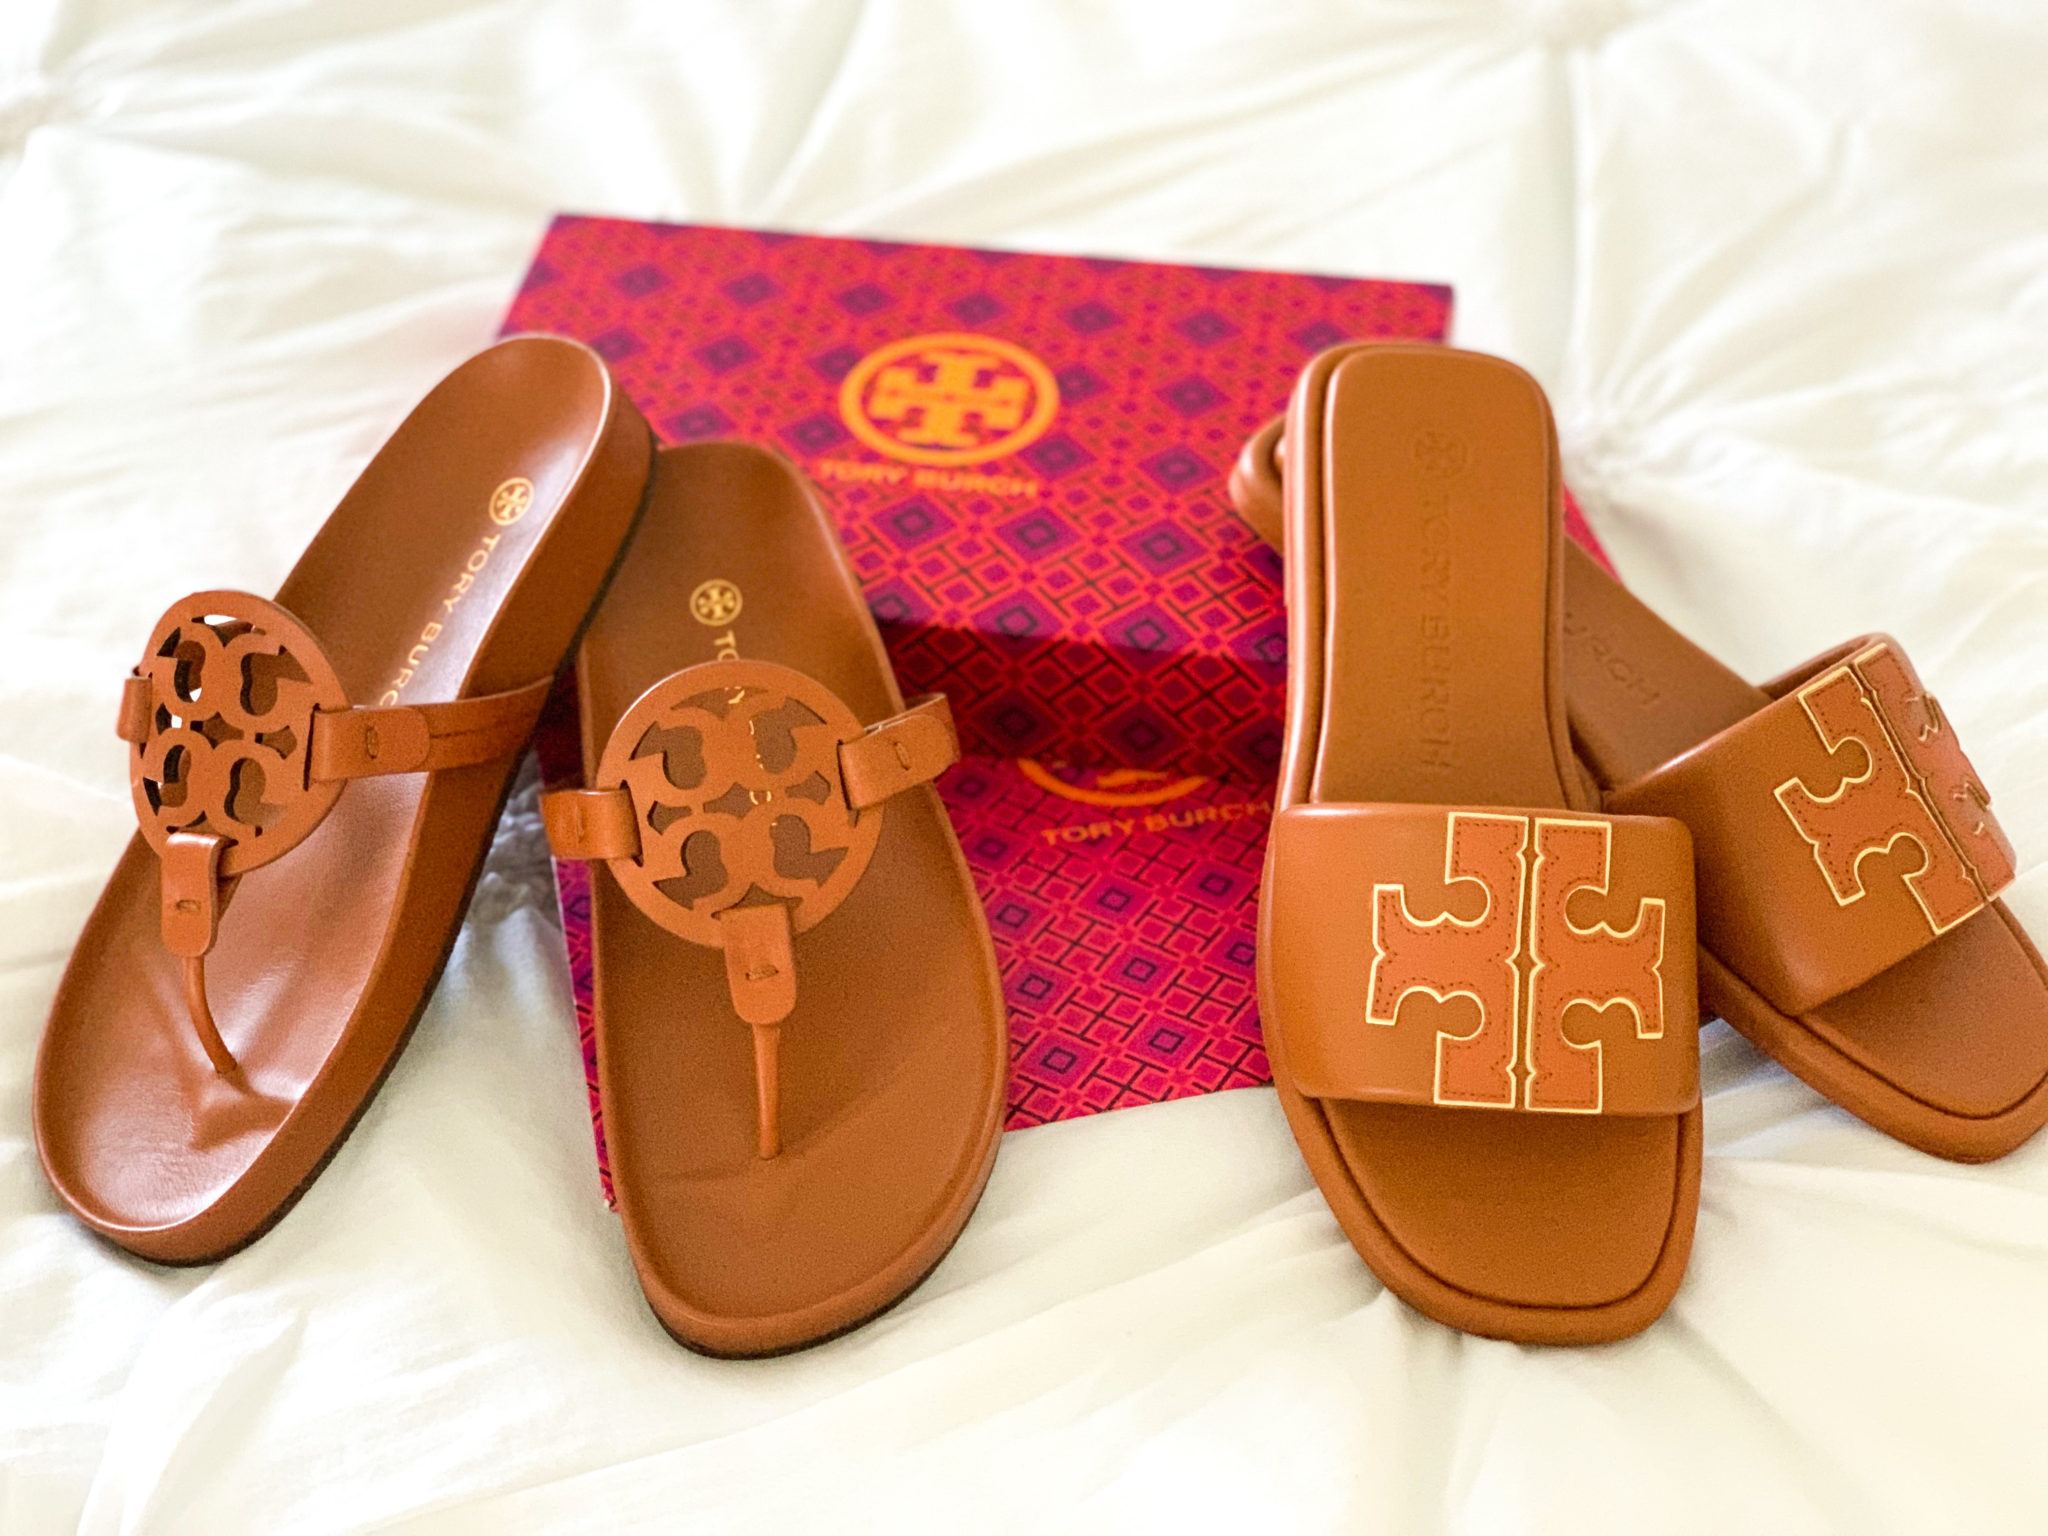 New Tory Burch Miller Cloud Sandals Review The Double Take Girls